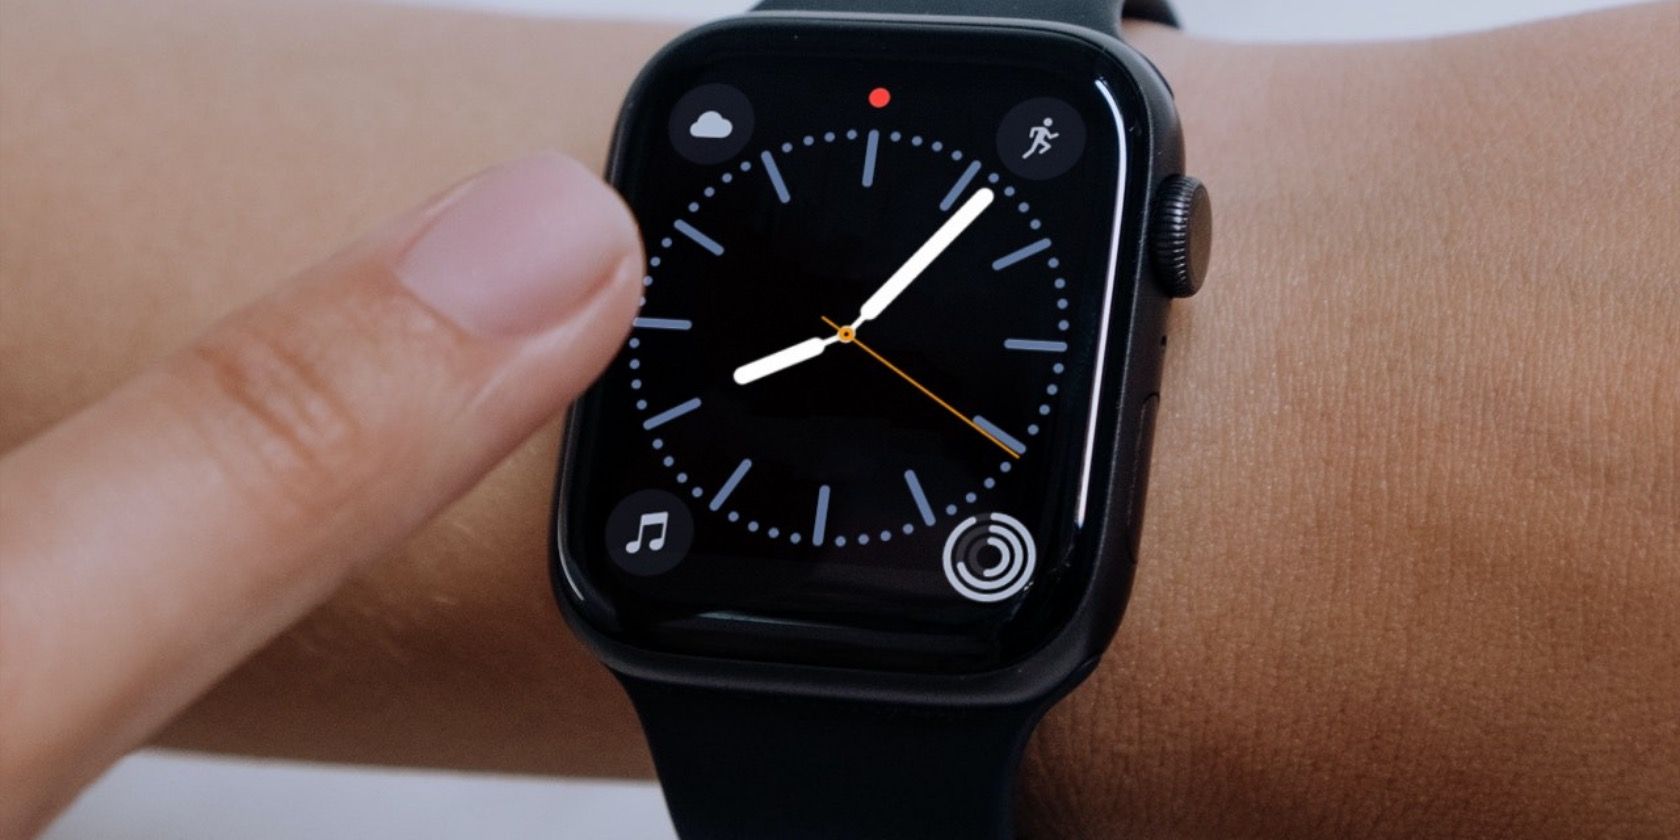 Apple Watch face with a red dot.